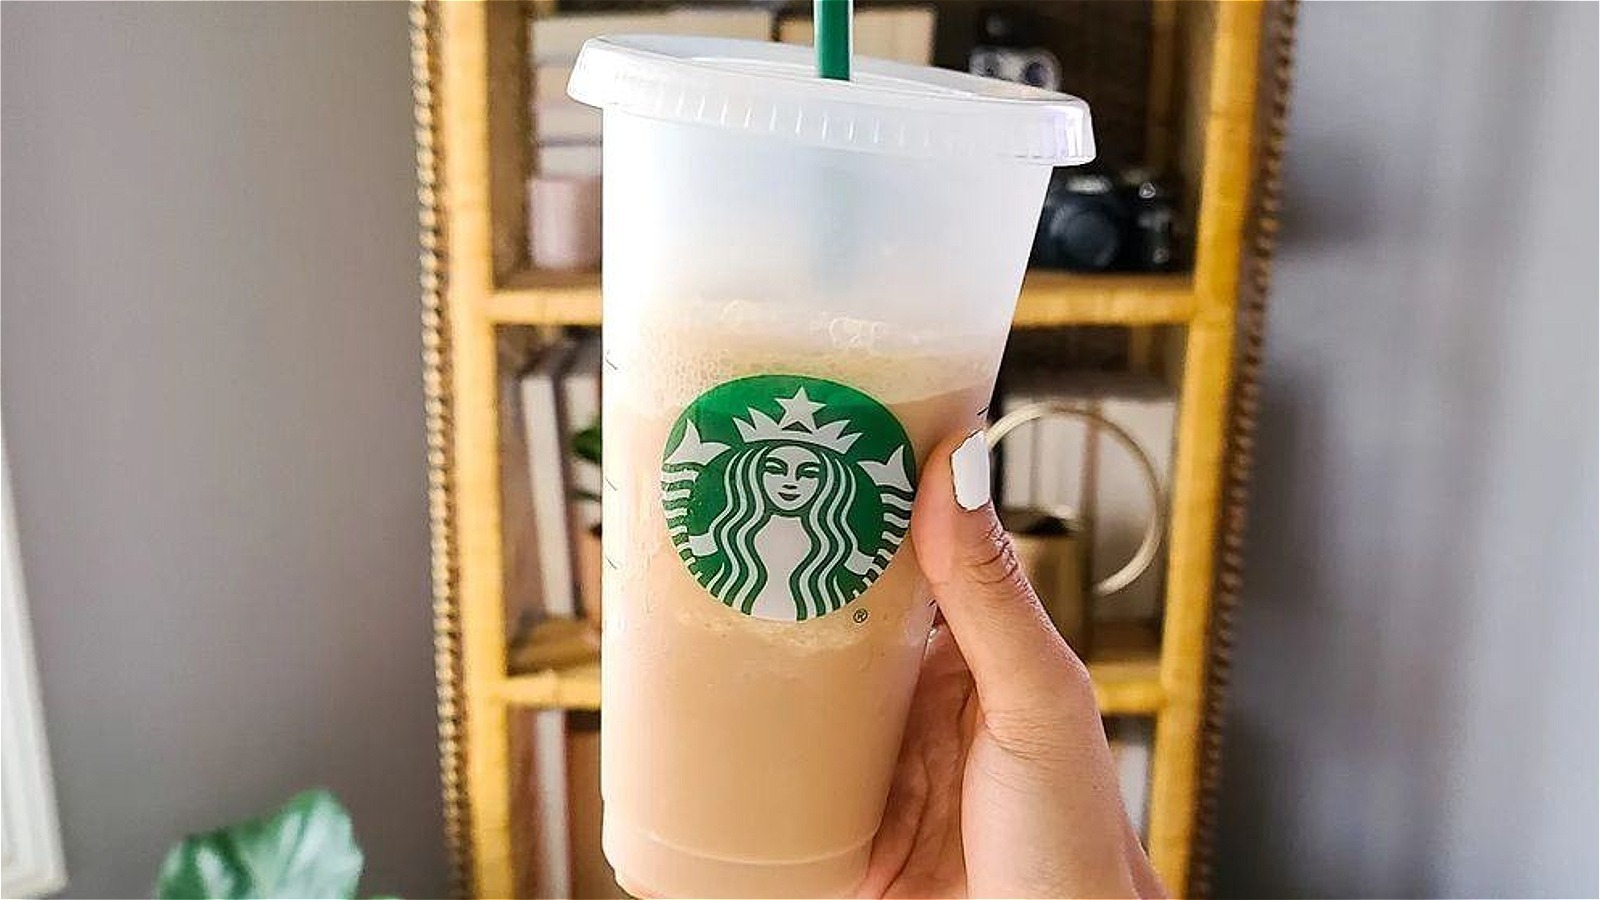 New Reusable Cups, Designed by Starbucks Baristas, Benefit Partners in Need